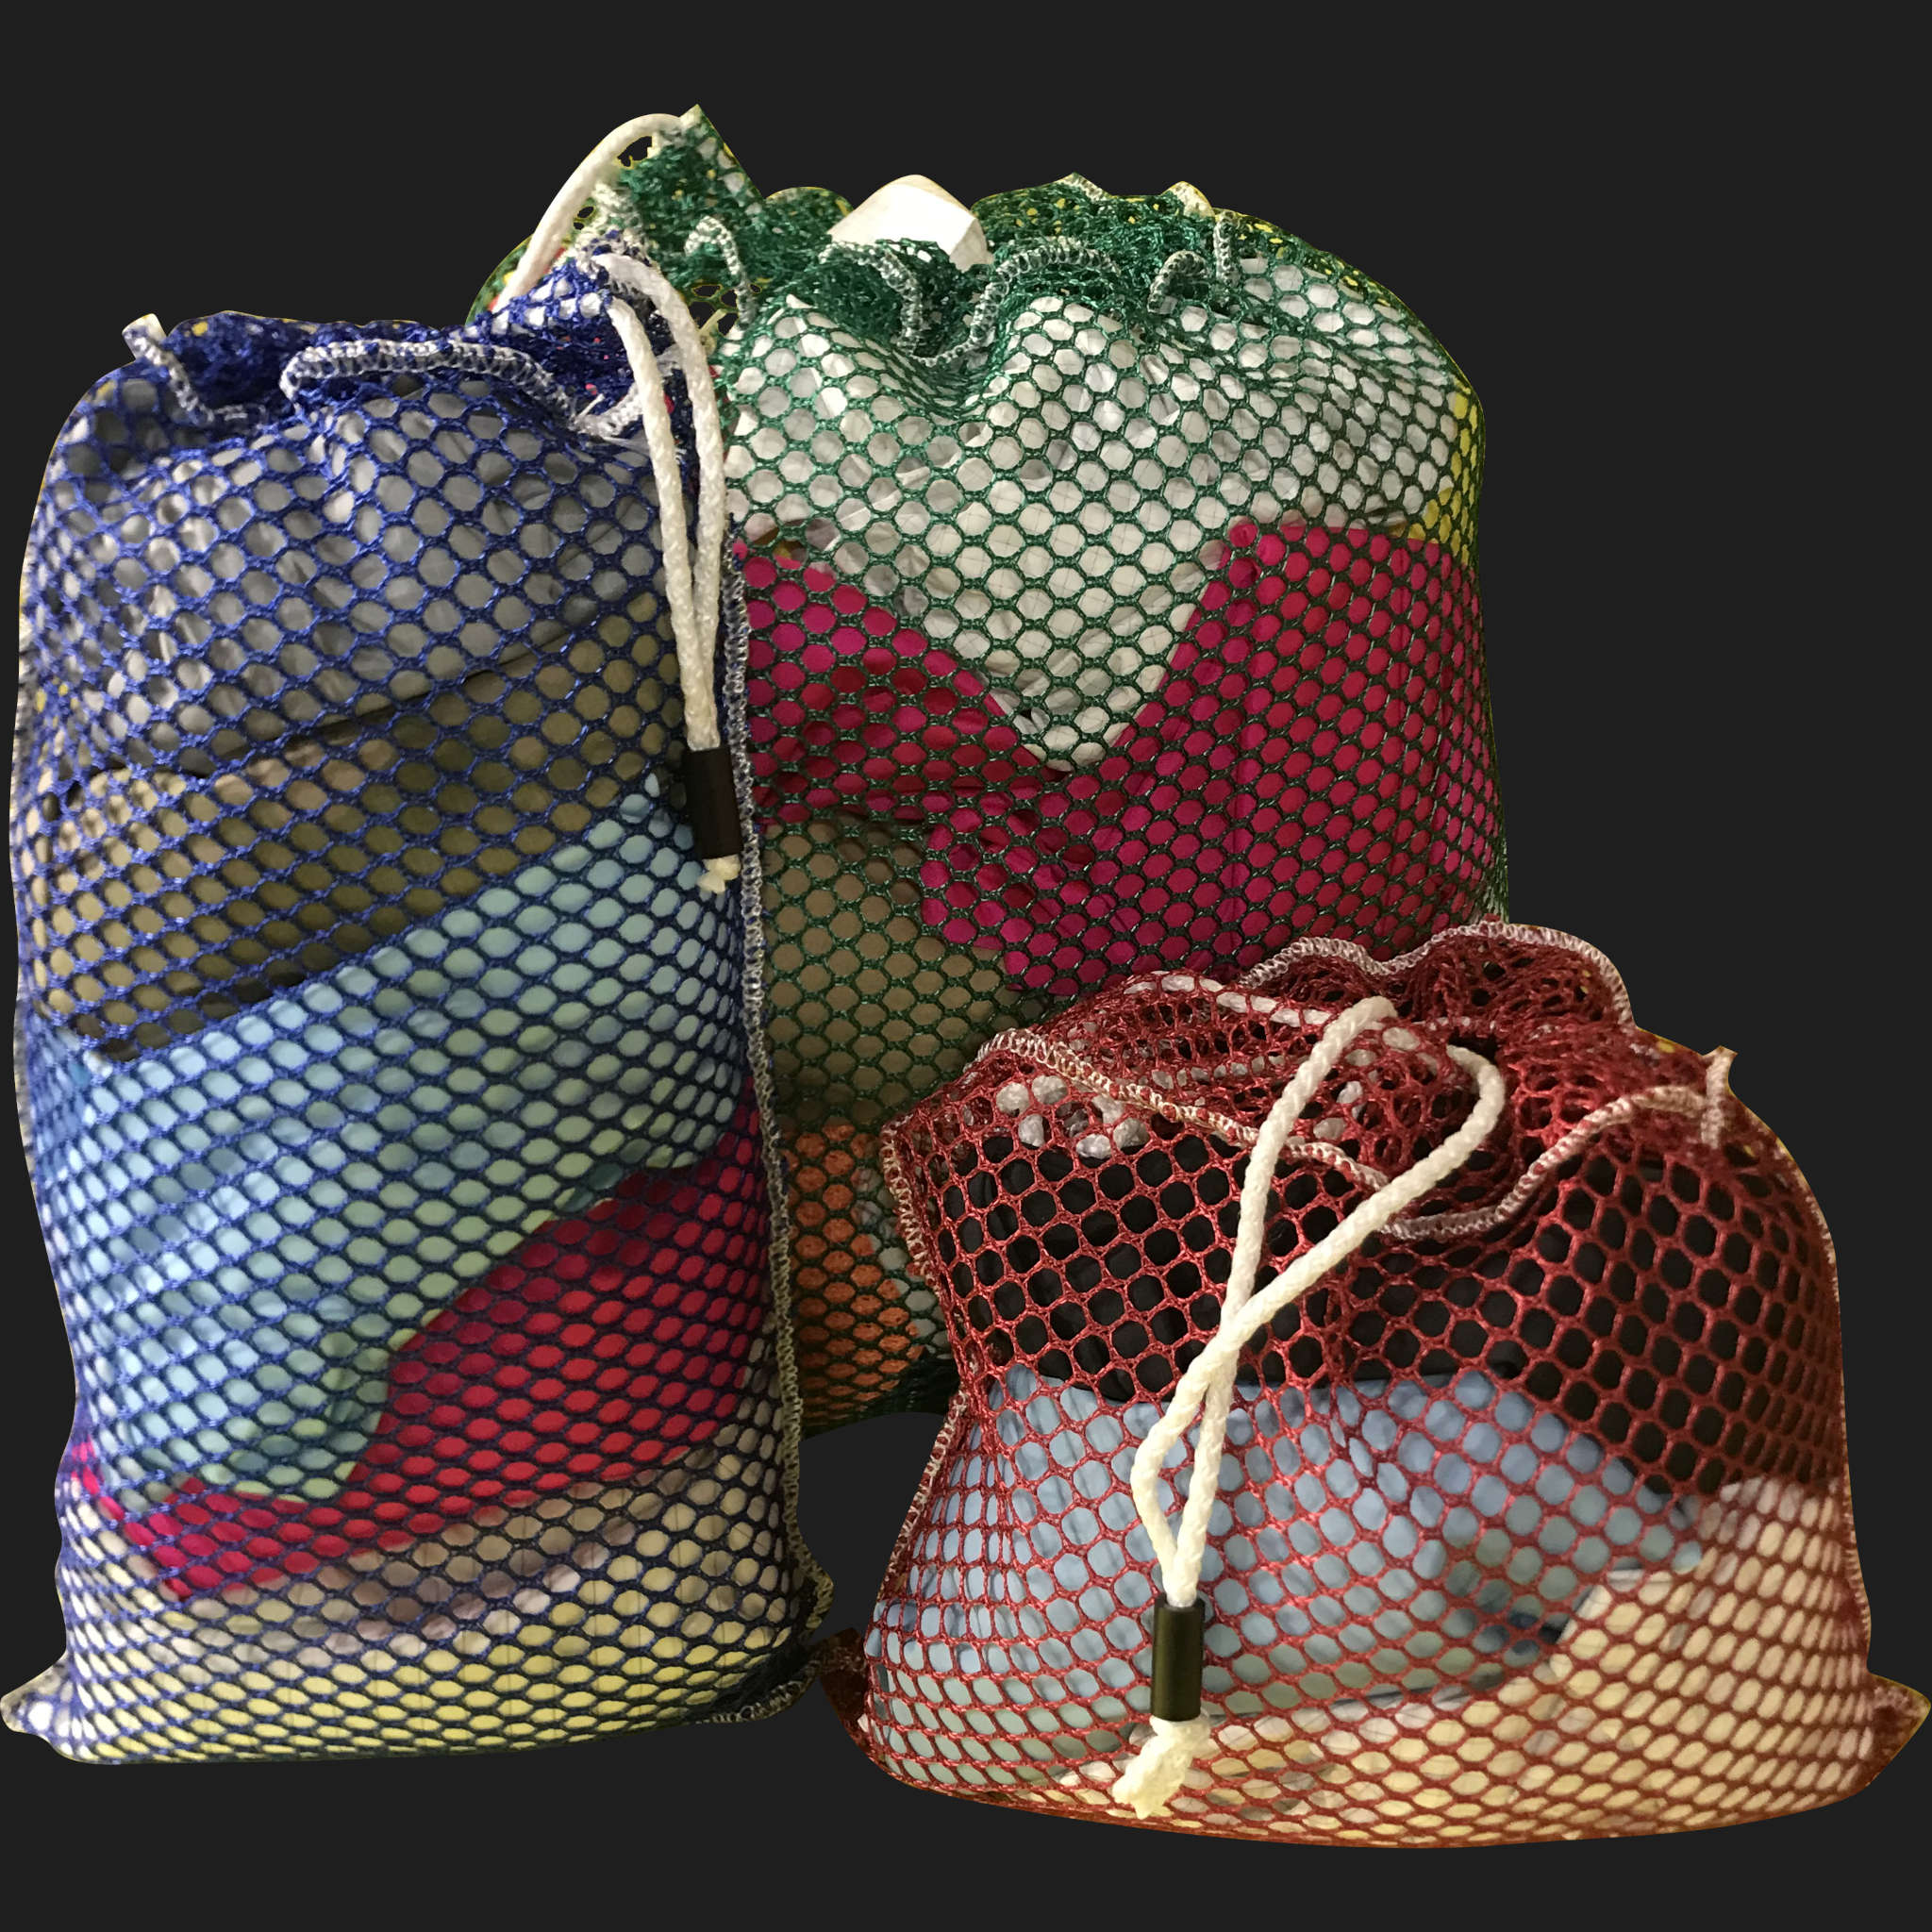 34" x 58" Customized Mesh-Net-Laundry Bags Heavy Duty with Cord and barrellock closure